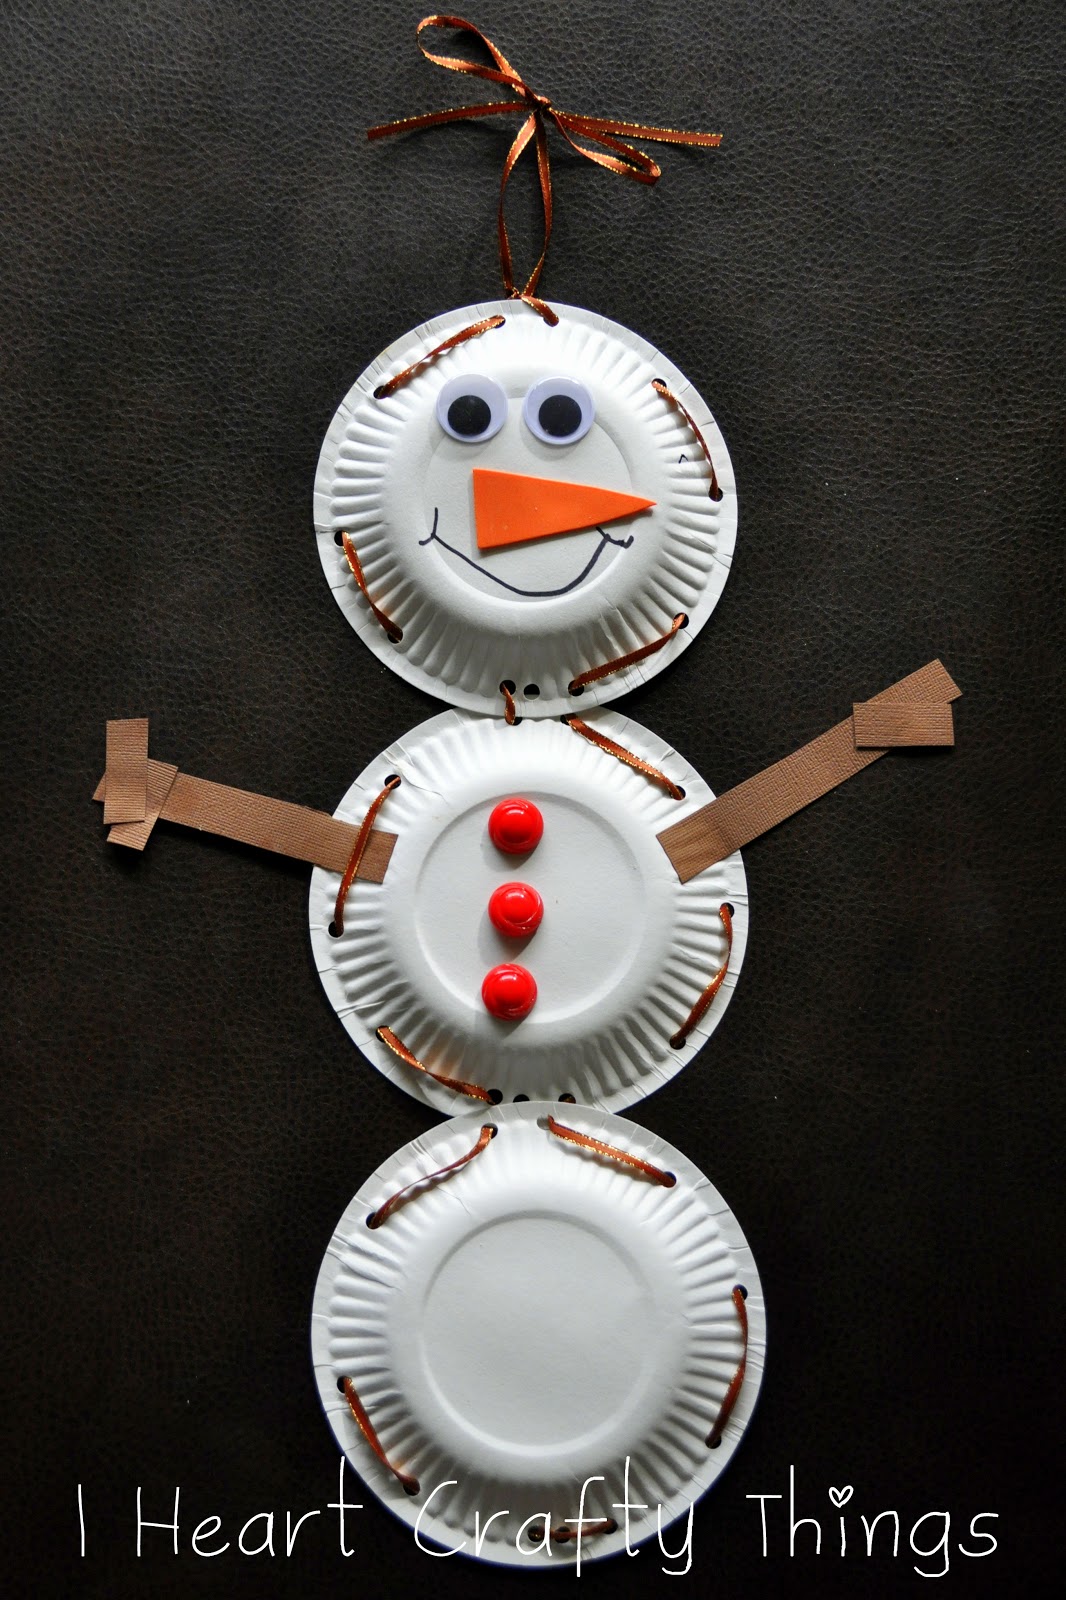 Paper Plate Snowman With Lacing Practice - I Heart Crafty Things